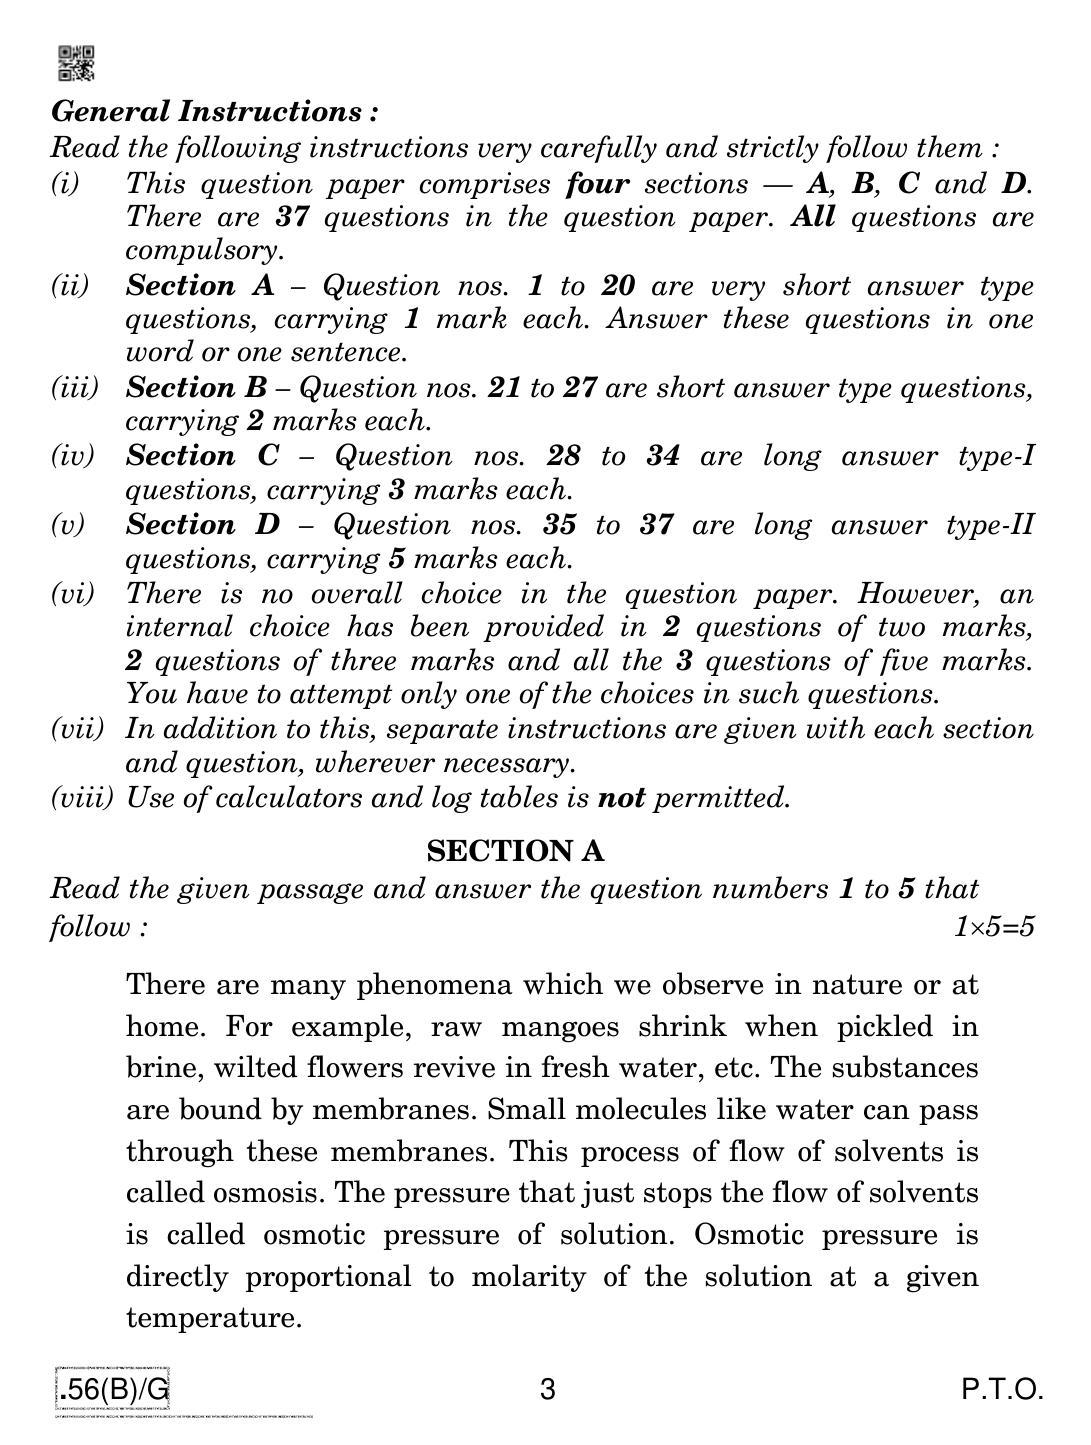 CBSE Class 12 56(B)-C - Chemistry For Blind Candidates 2020 Compartment Question Paper - Page 3